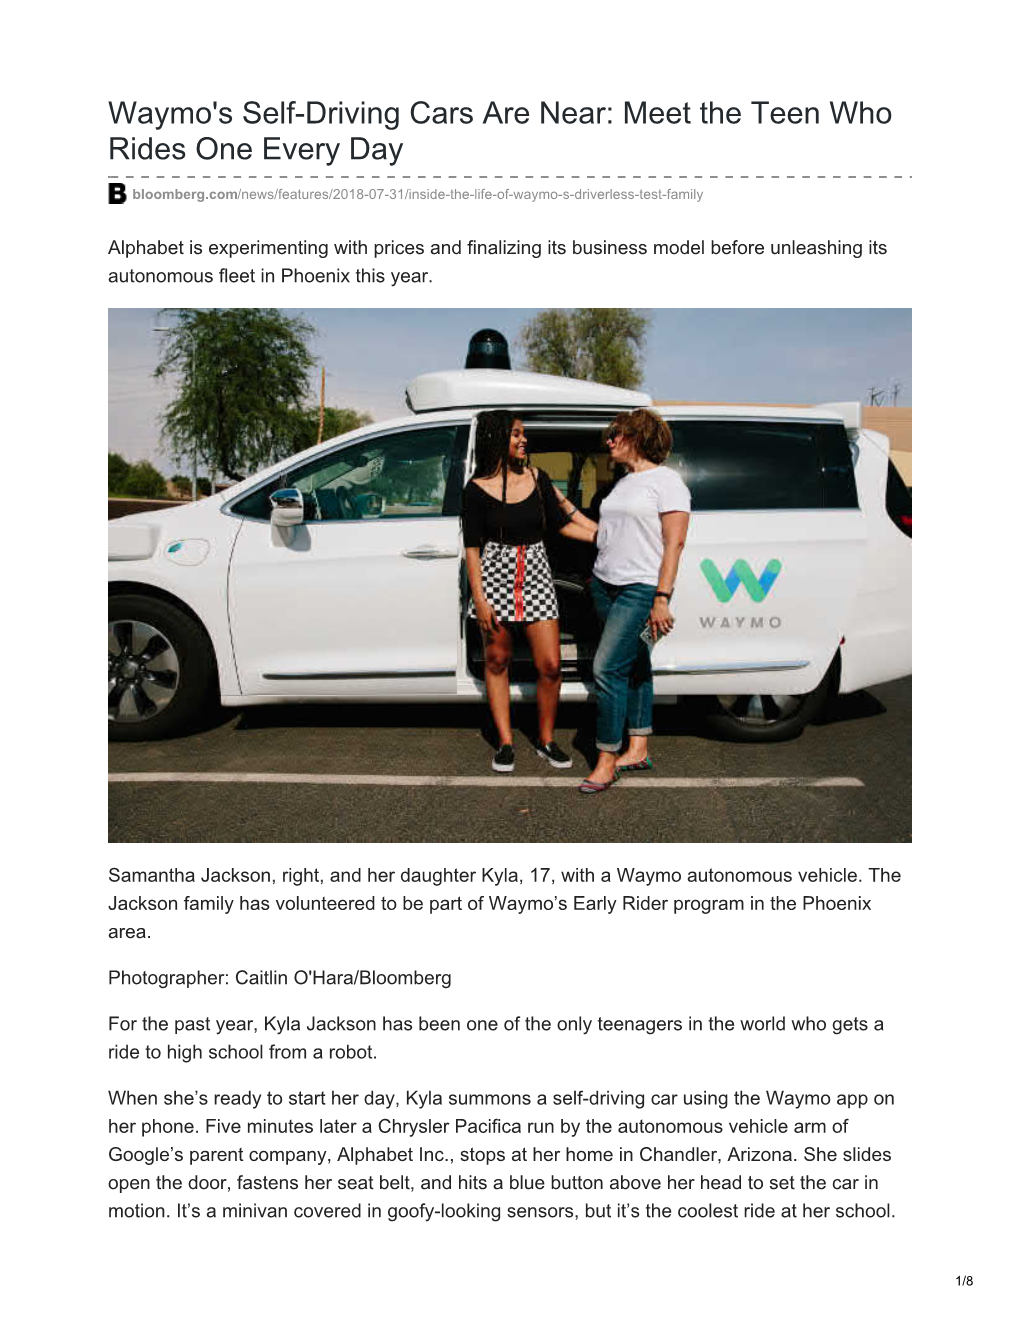 Waymo's Self-Driving Cars Are Near: Meet the Teen Who Rides One Every Day